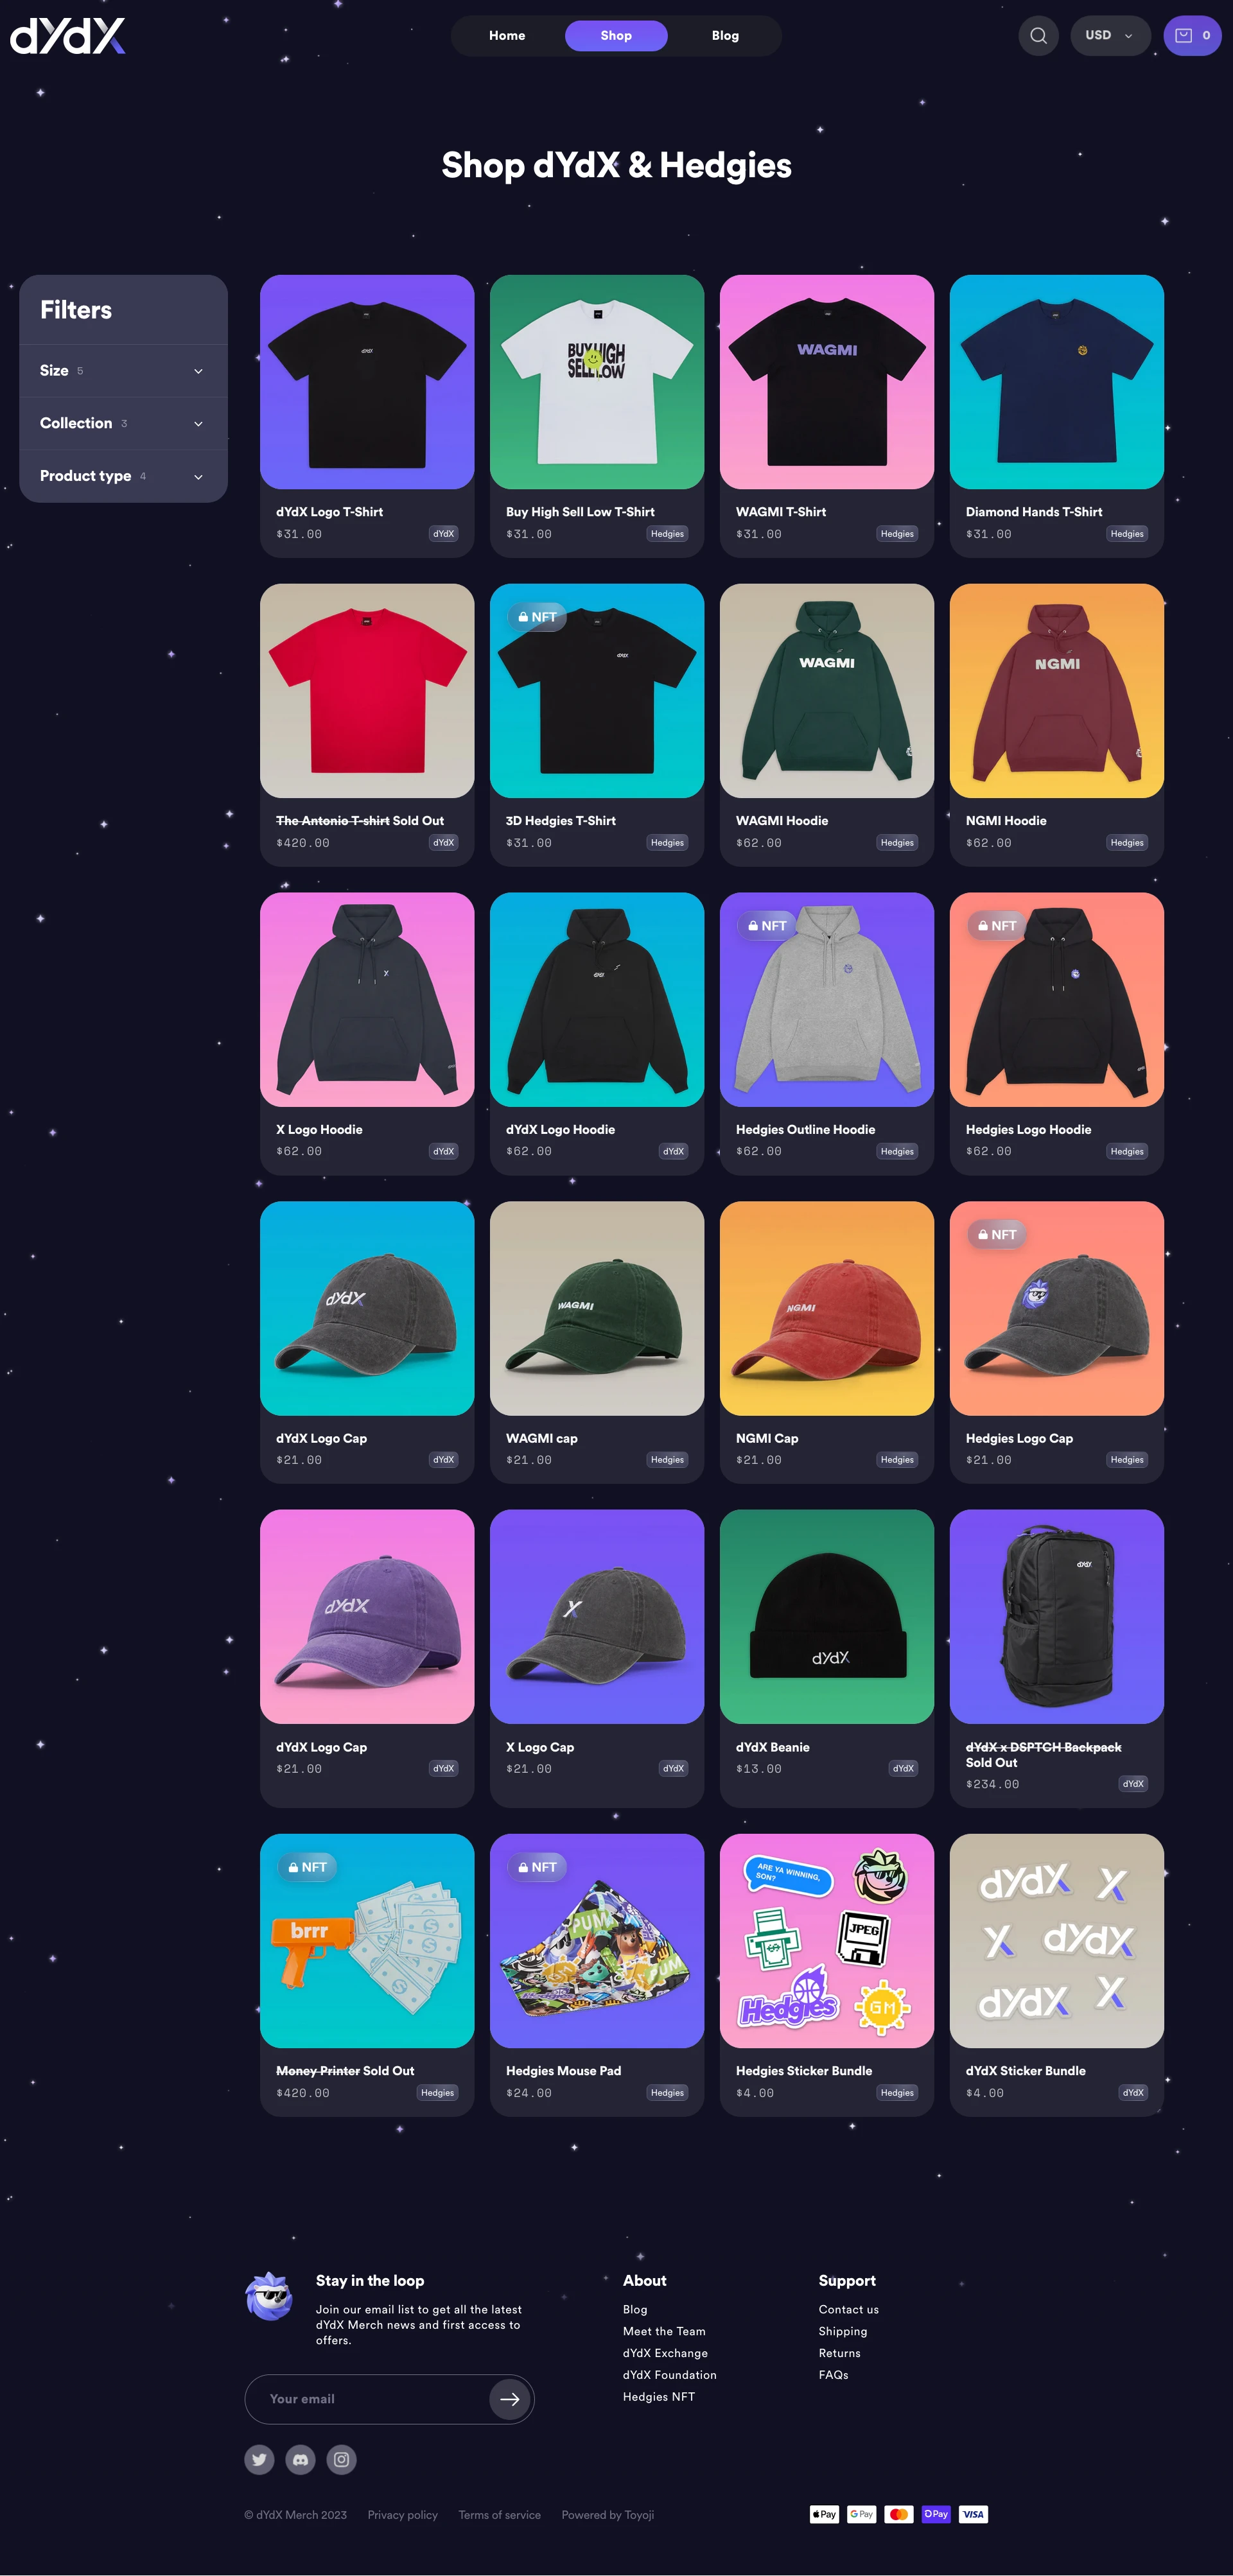 dYdX Merch Landing Page Example: Unleash your trading potential with high quality apparel, hats, and accessories from dYdX.